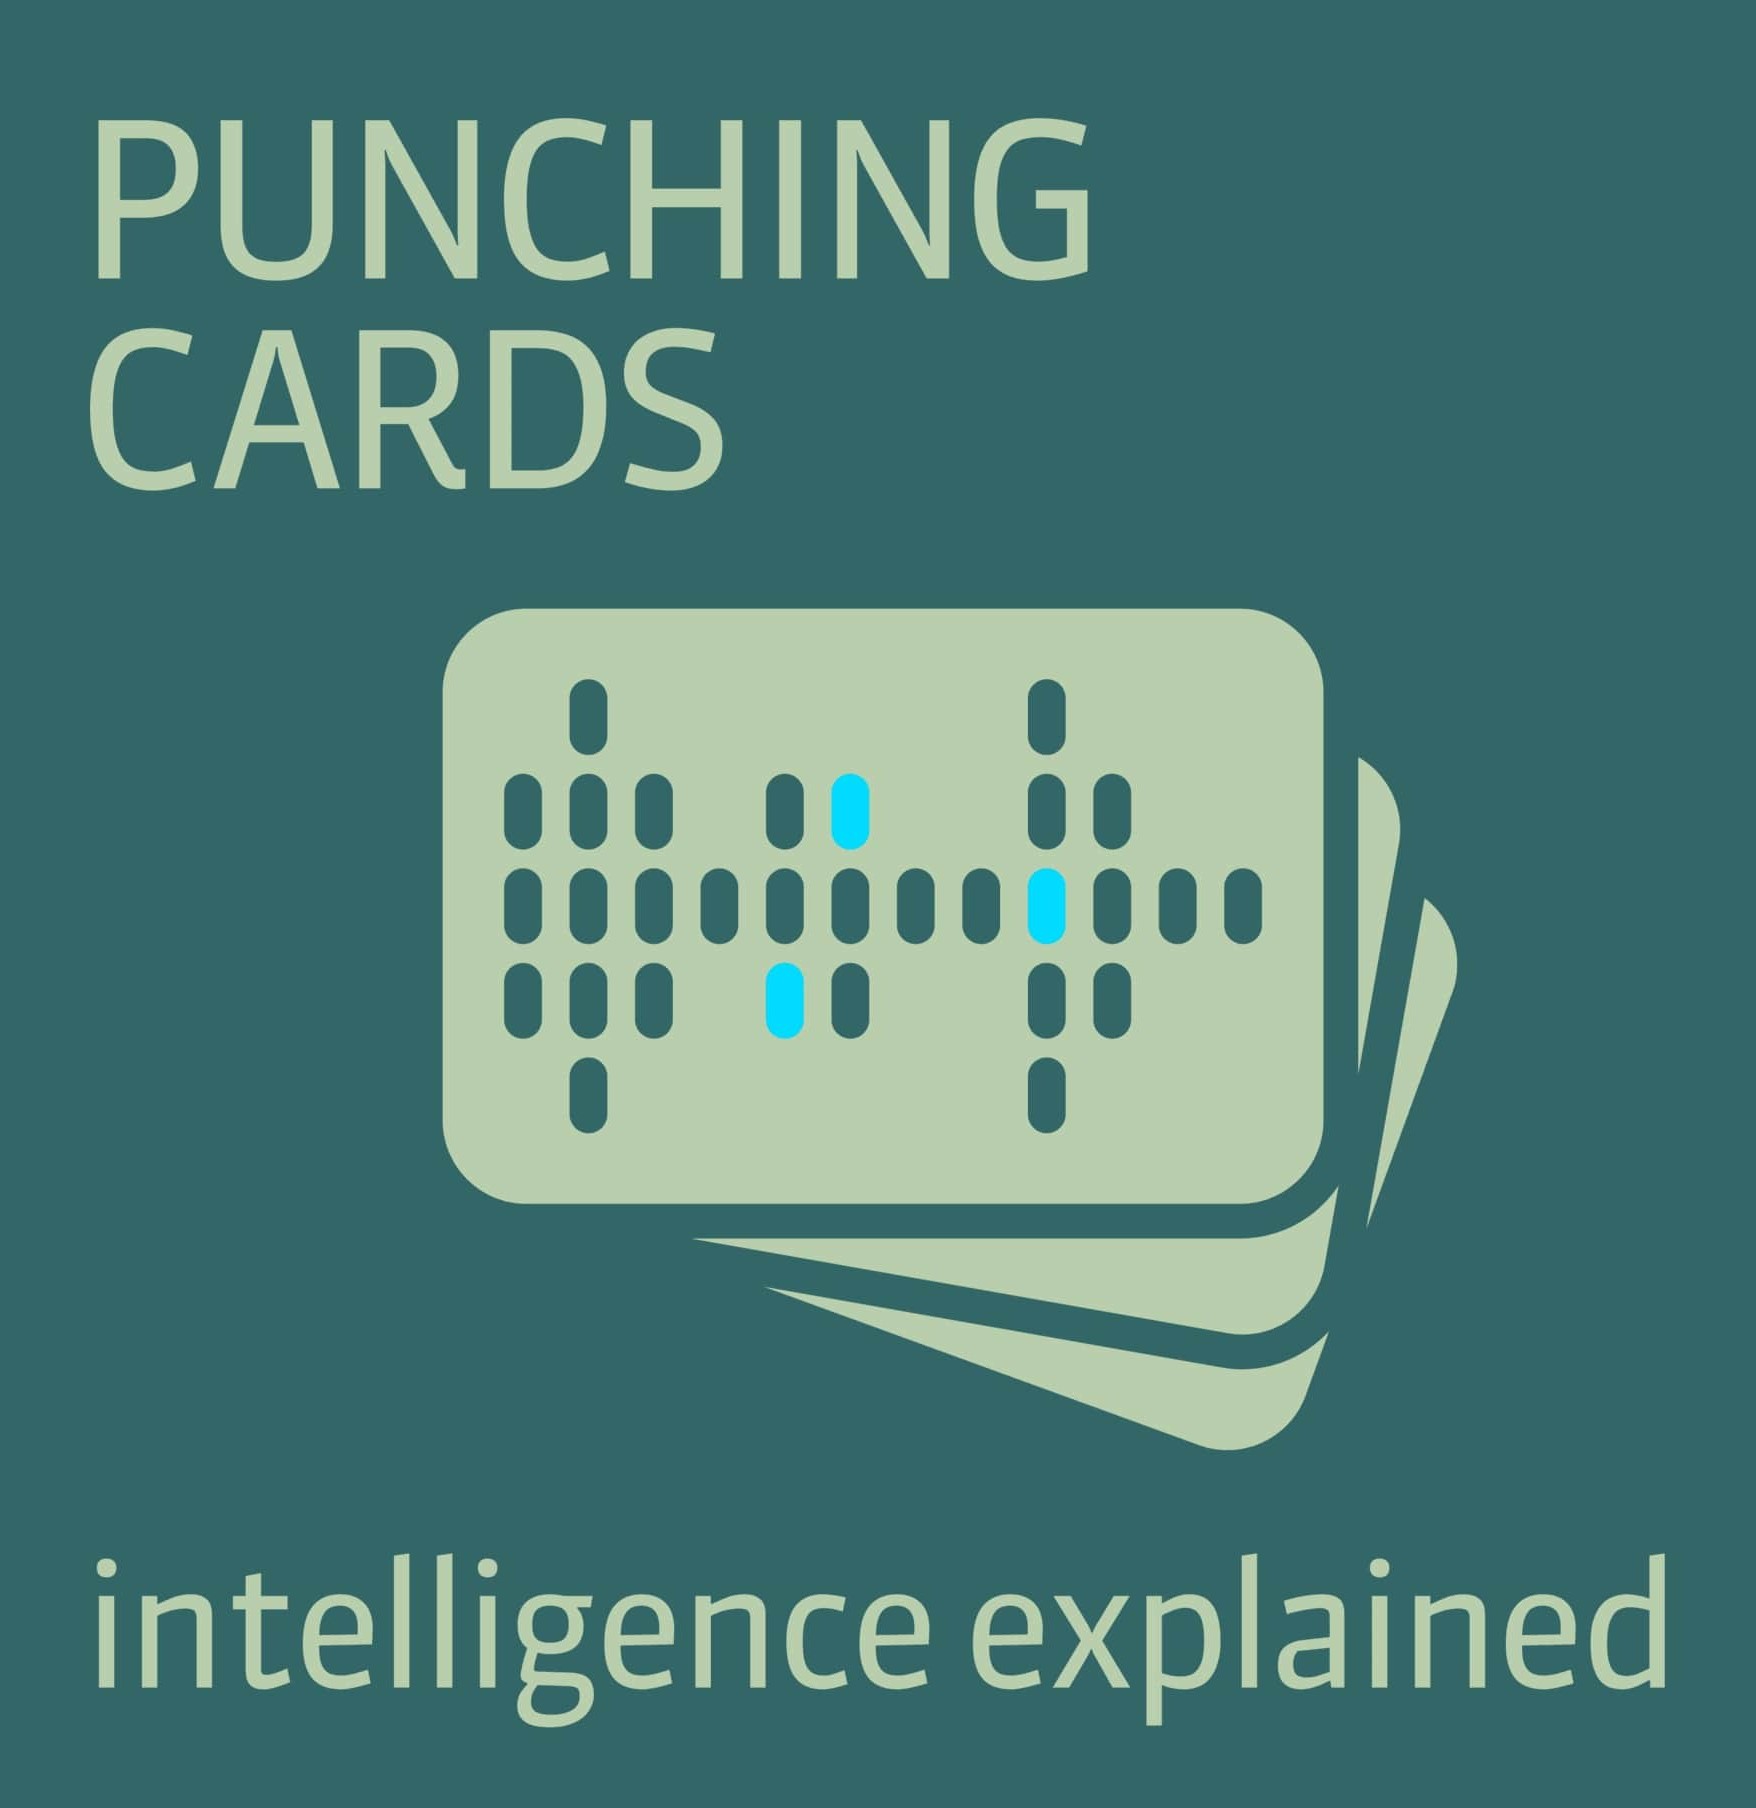 Listen to the First Episode of “Punching Cards, the SCIoI Podcast About All Things Intelligent”